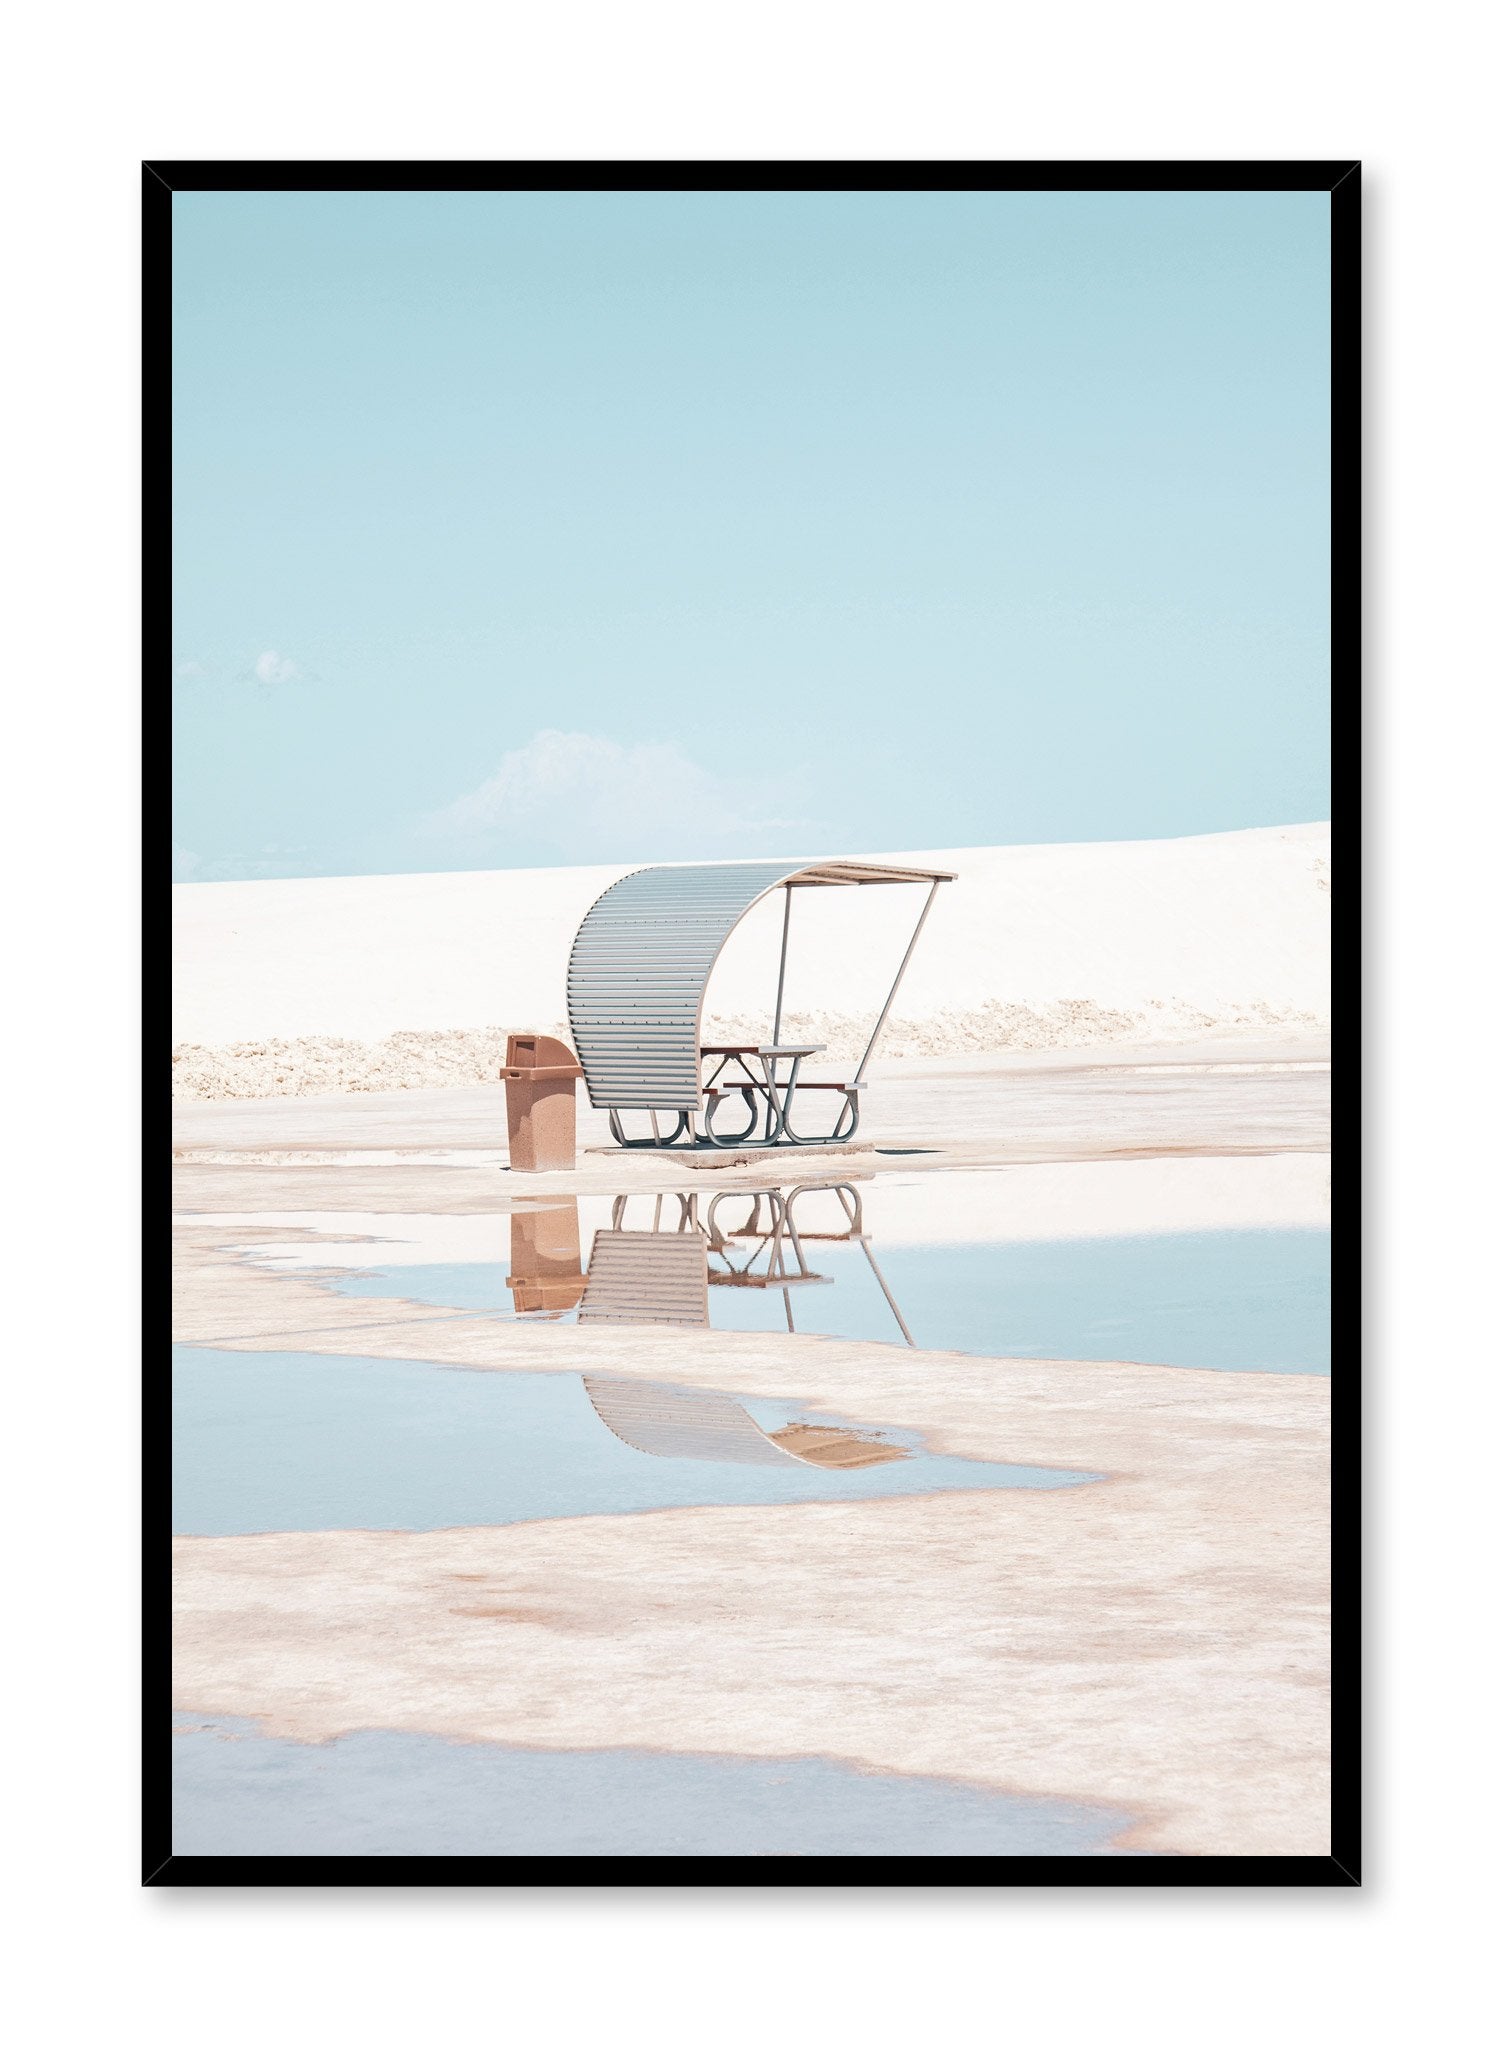 Modern minimalist poster by Opposite Wall with photography of deserted picnic table